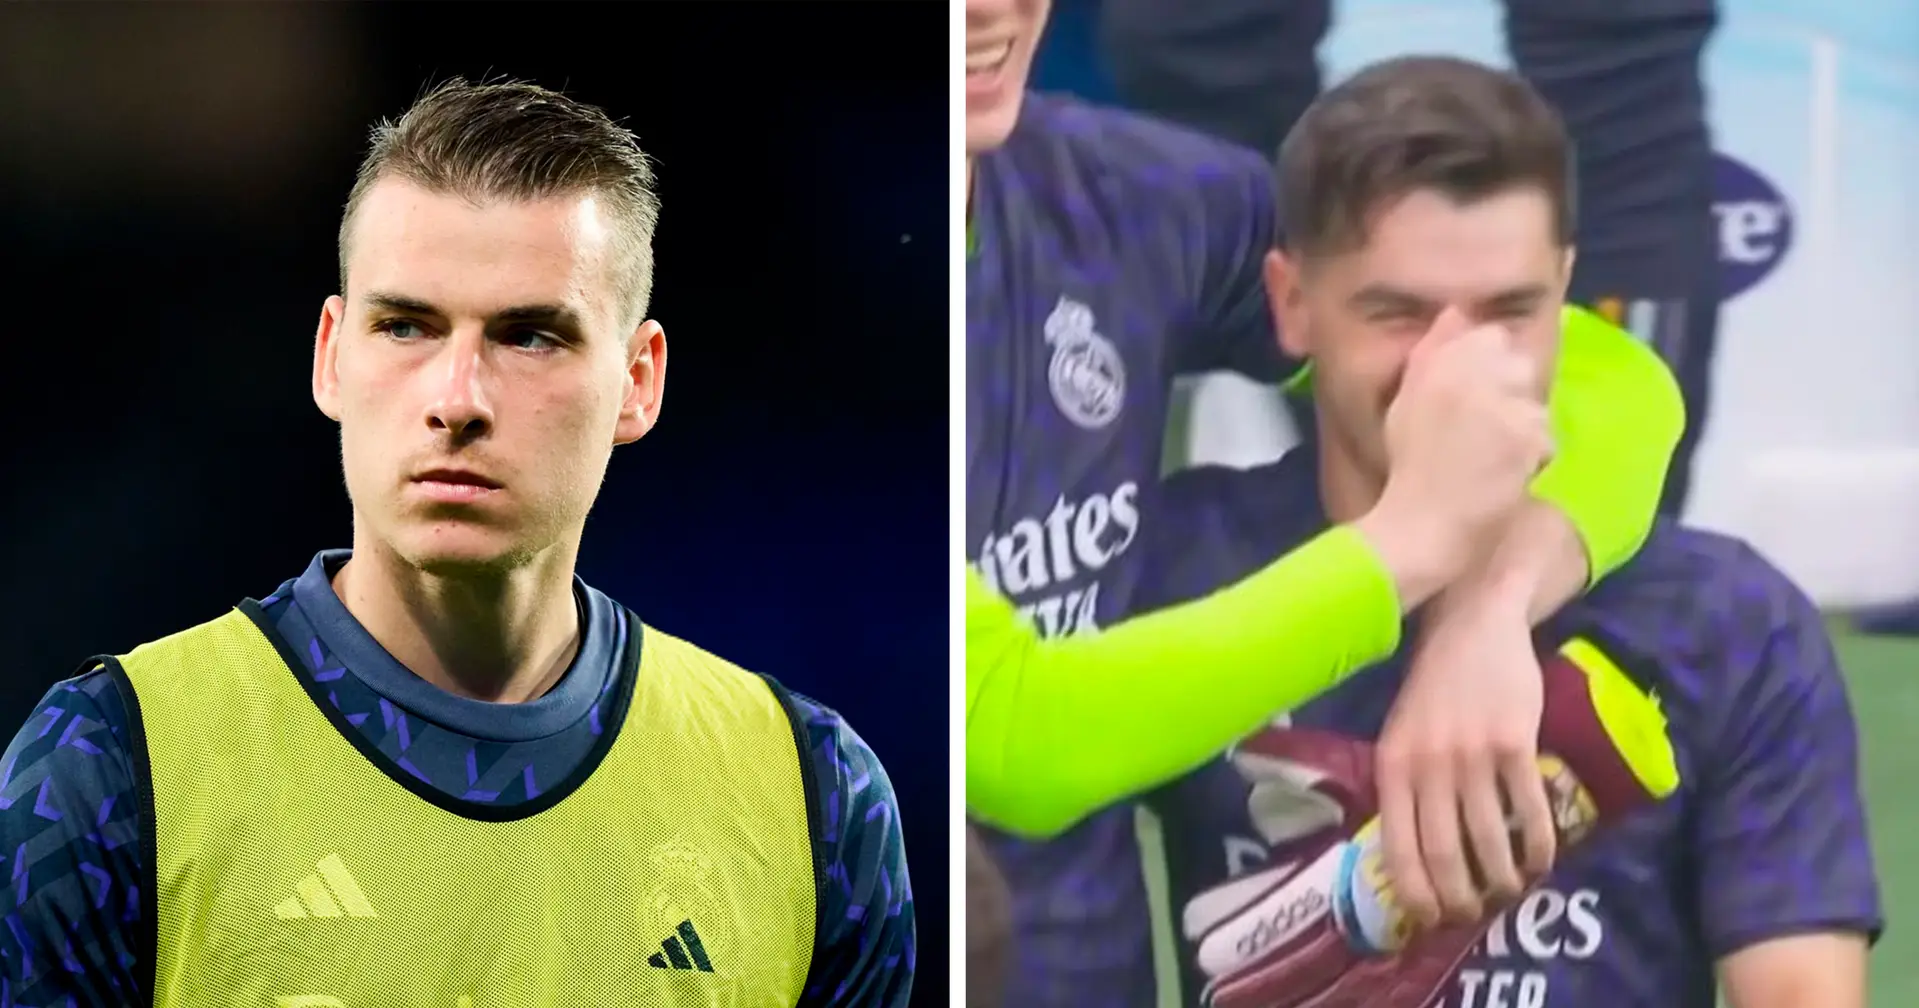 Spotted: Lunin's emotions after the Cadiz win - you don't see him like this very often